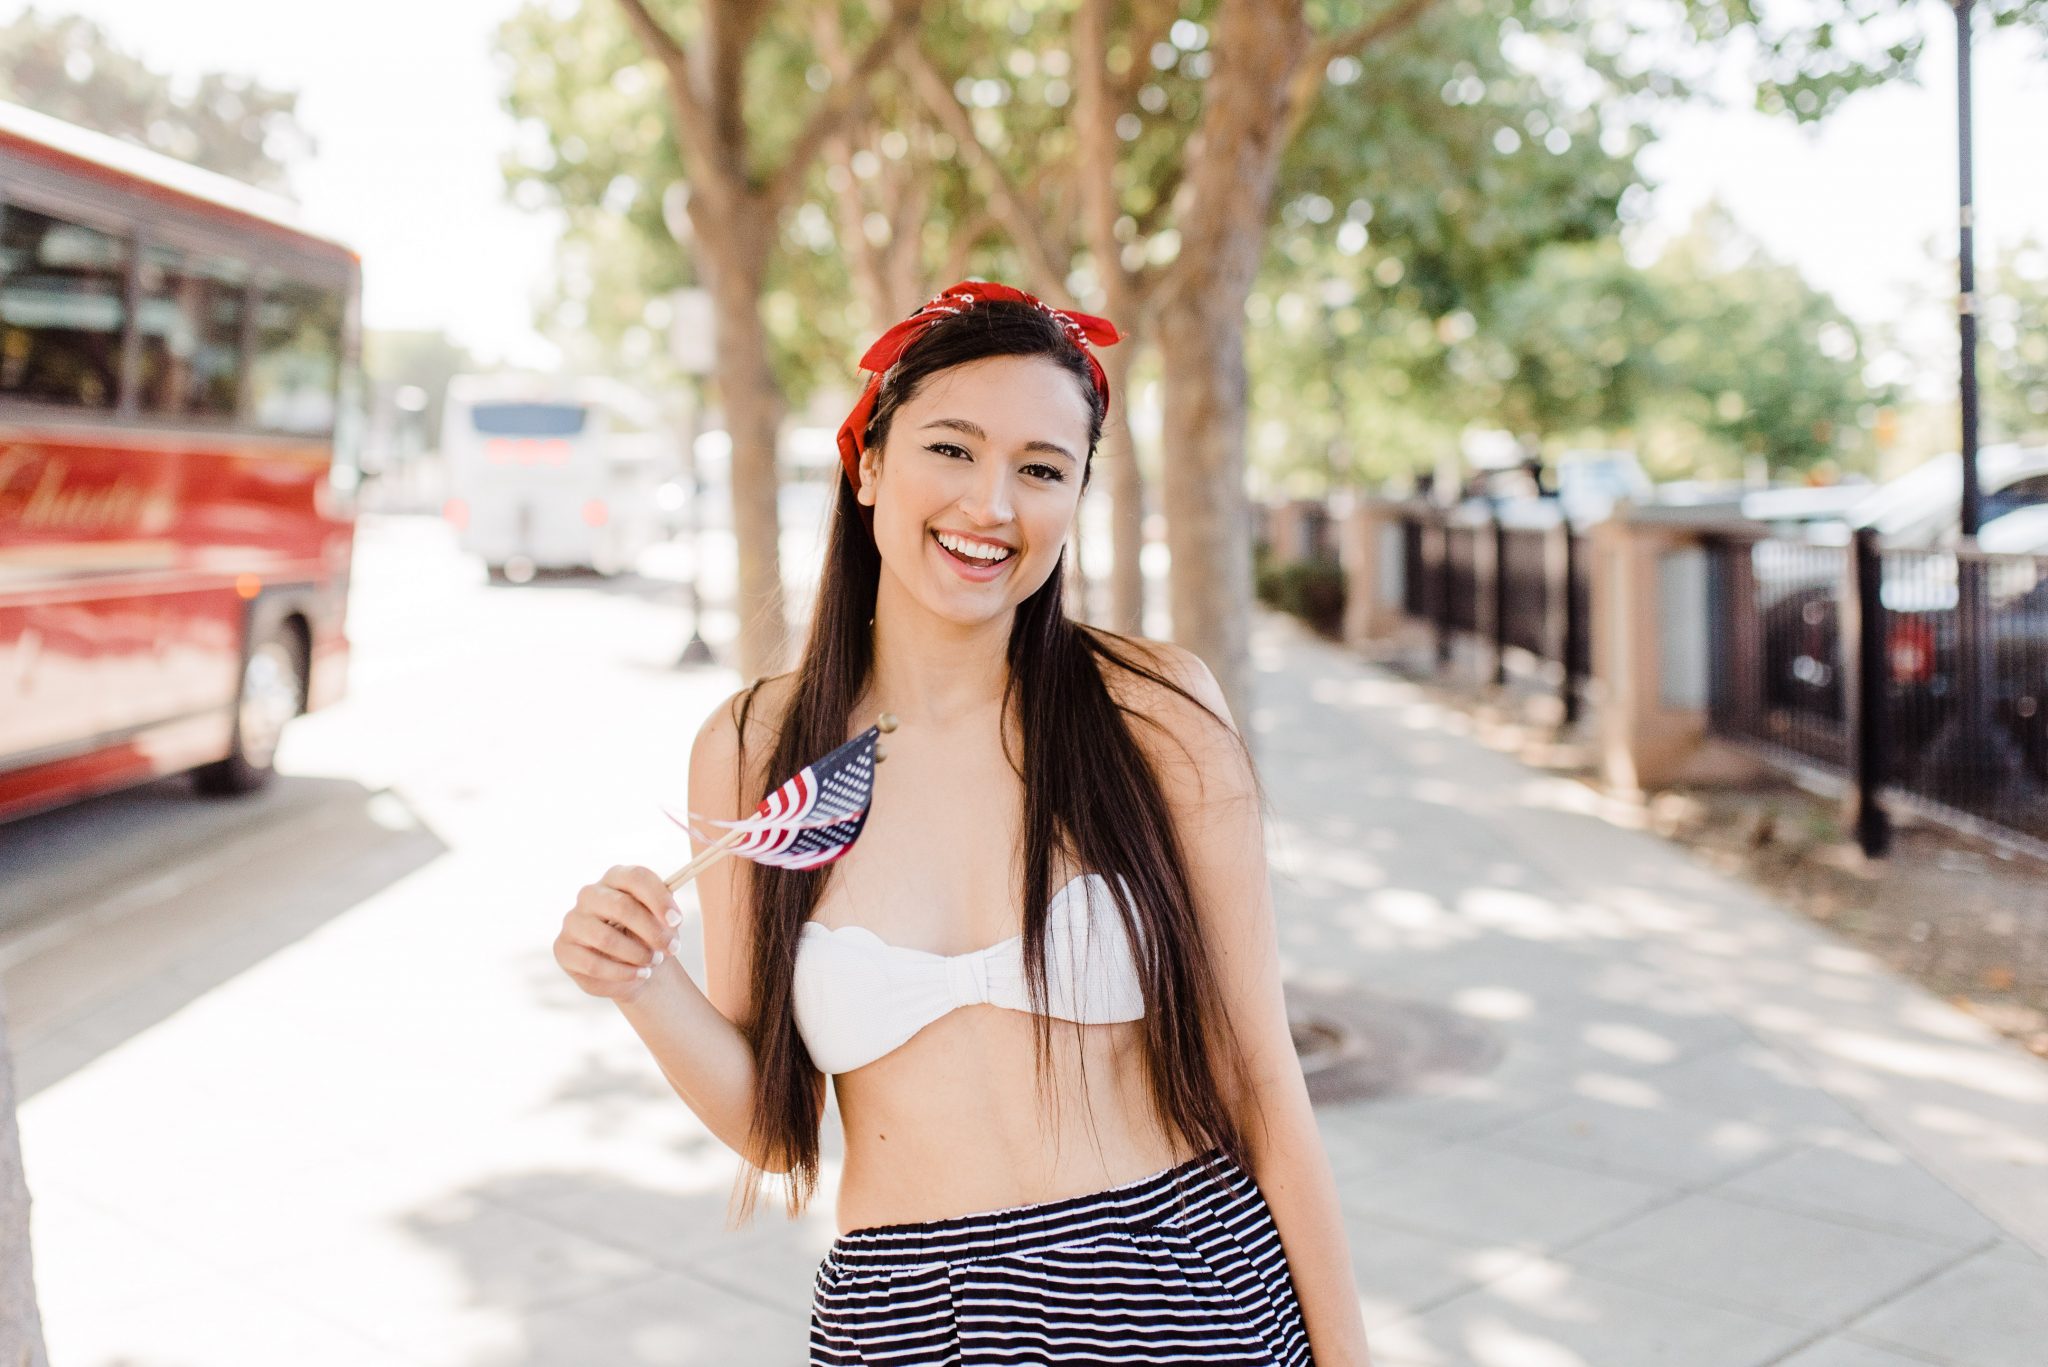 Sonia wearing an outfit for July 4th in Mountain View, CA